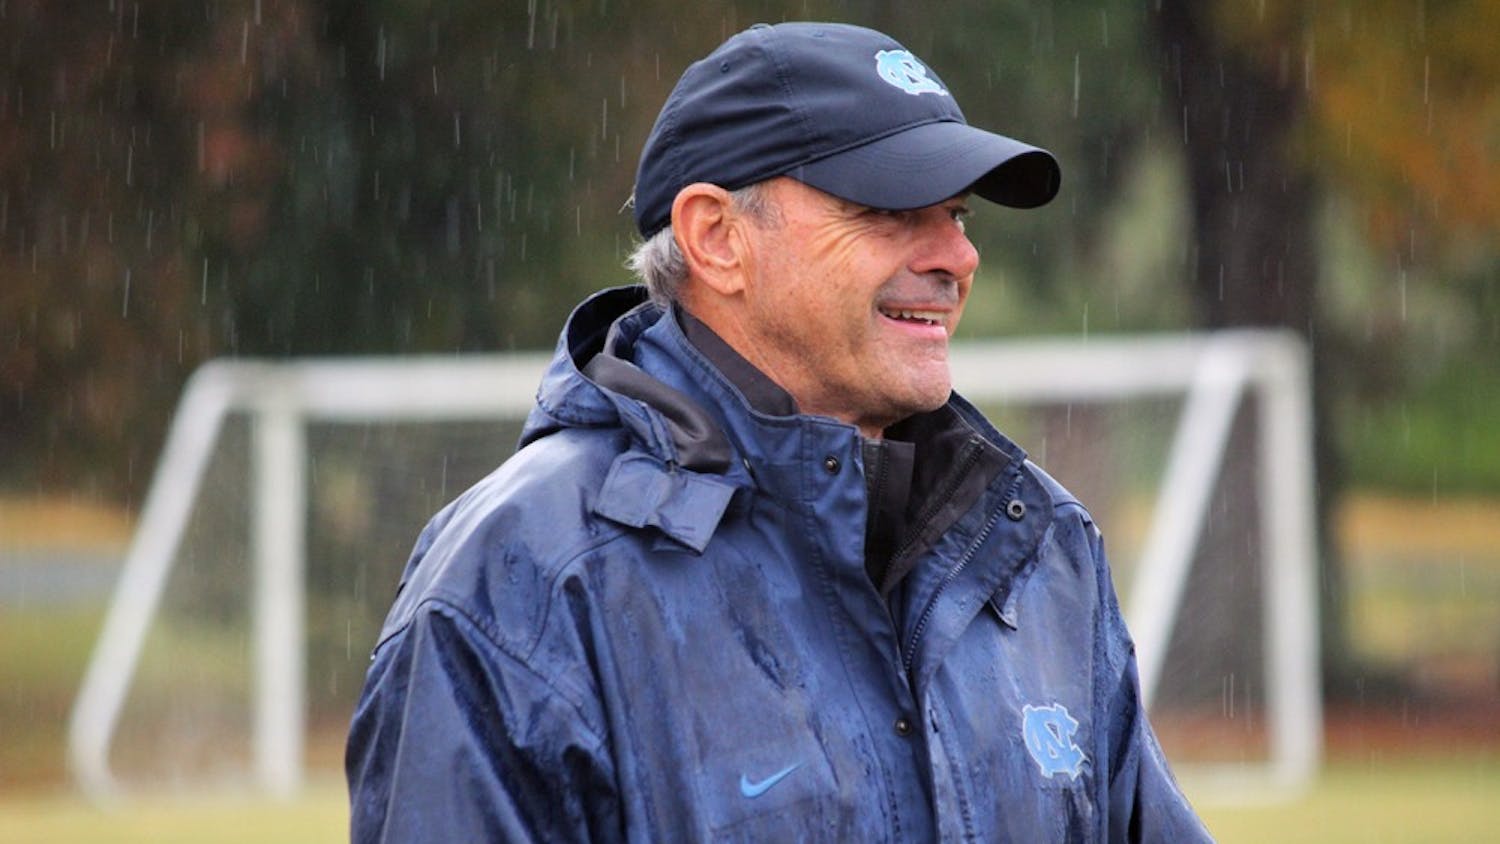 UNC assistant coach Bill Palladino has helped lead the women's soccer team to 23 national titles.